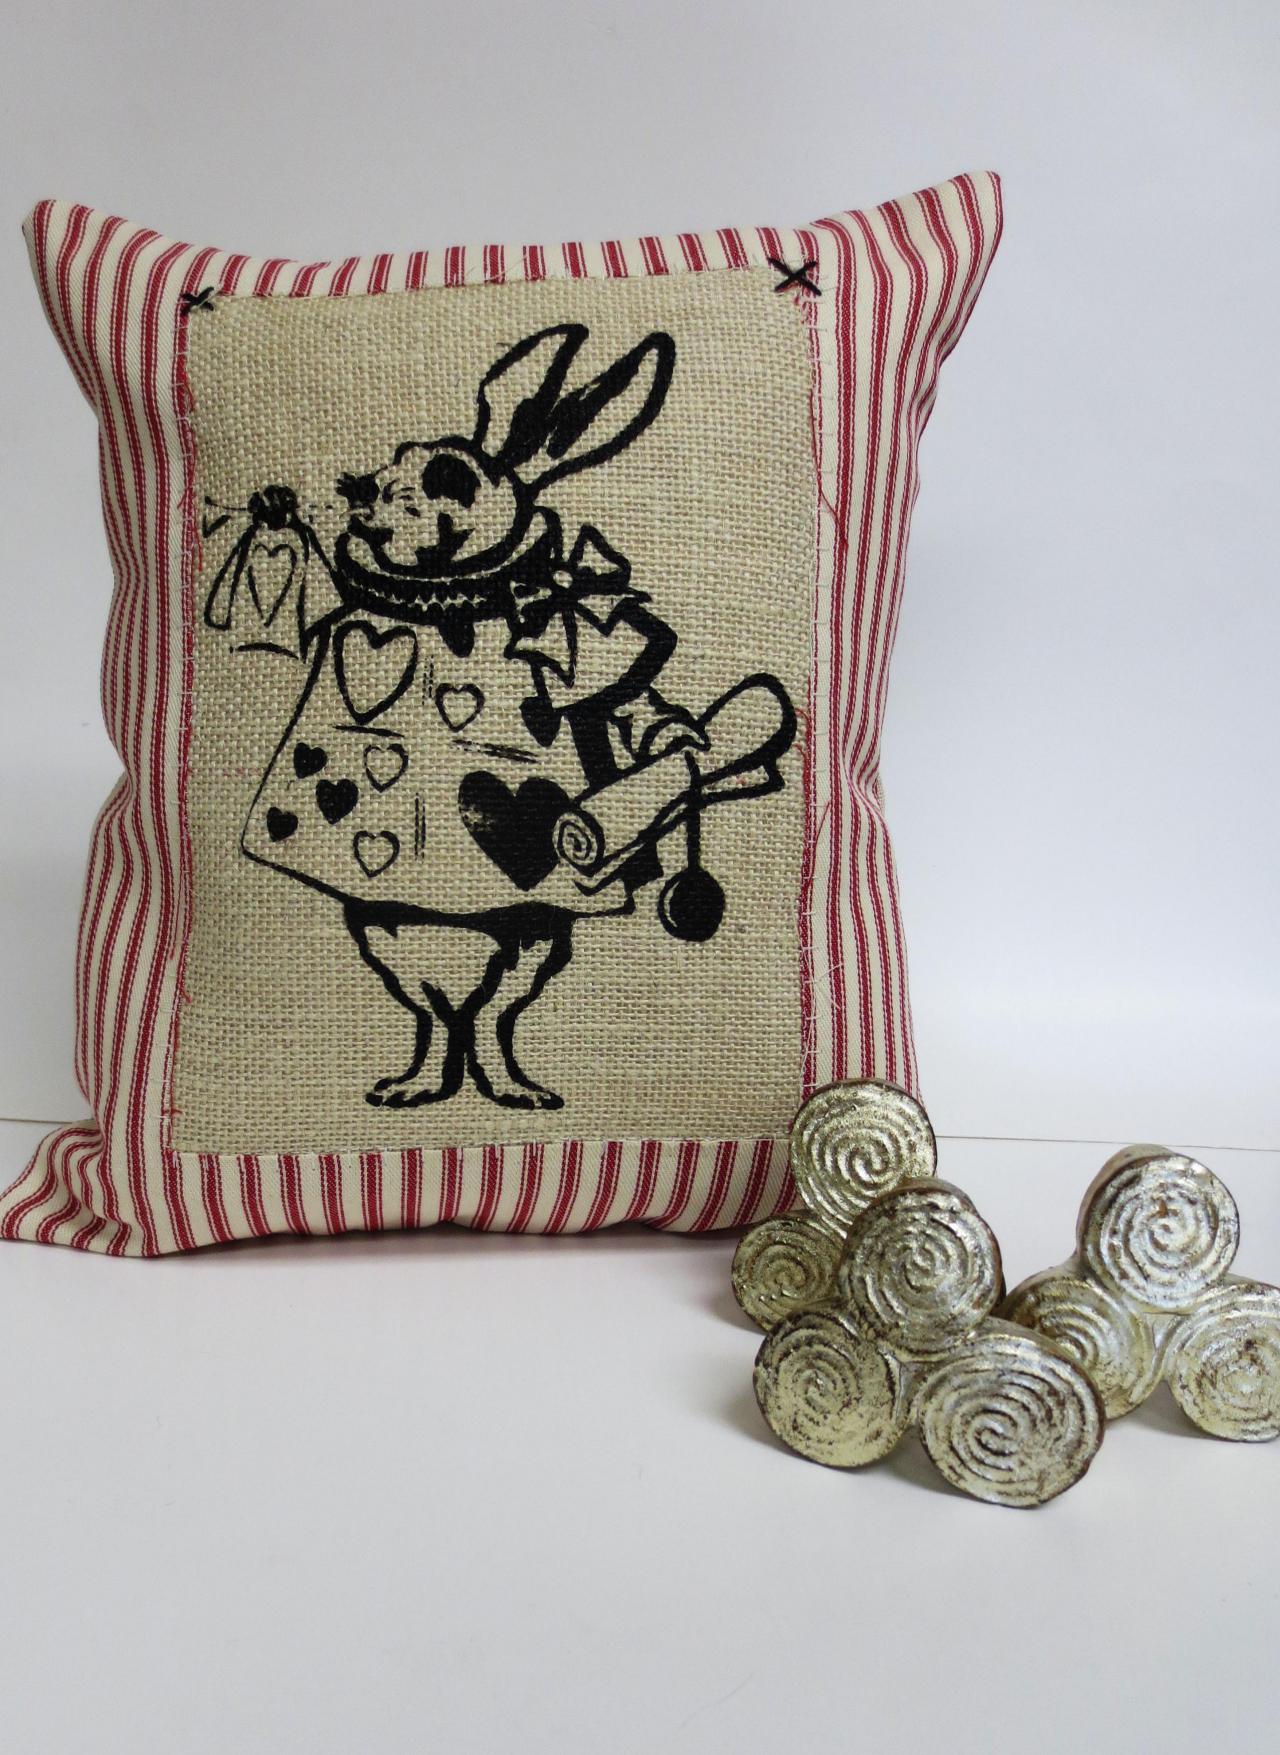 Red Ticking Stripe Fabric With Burlap And White Rabbit Screen Print